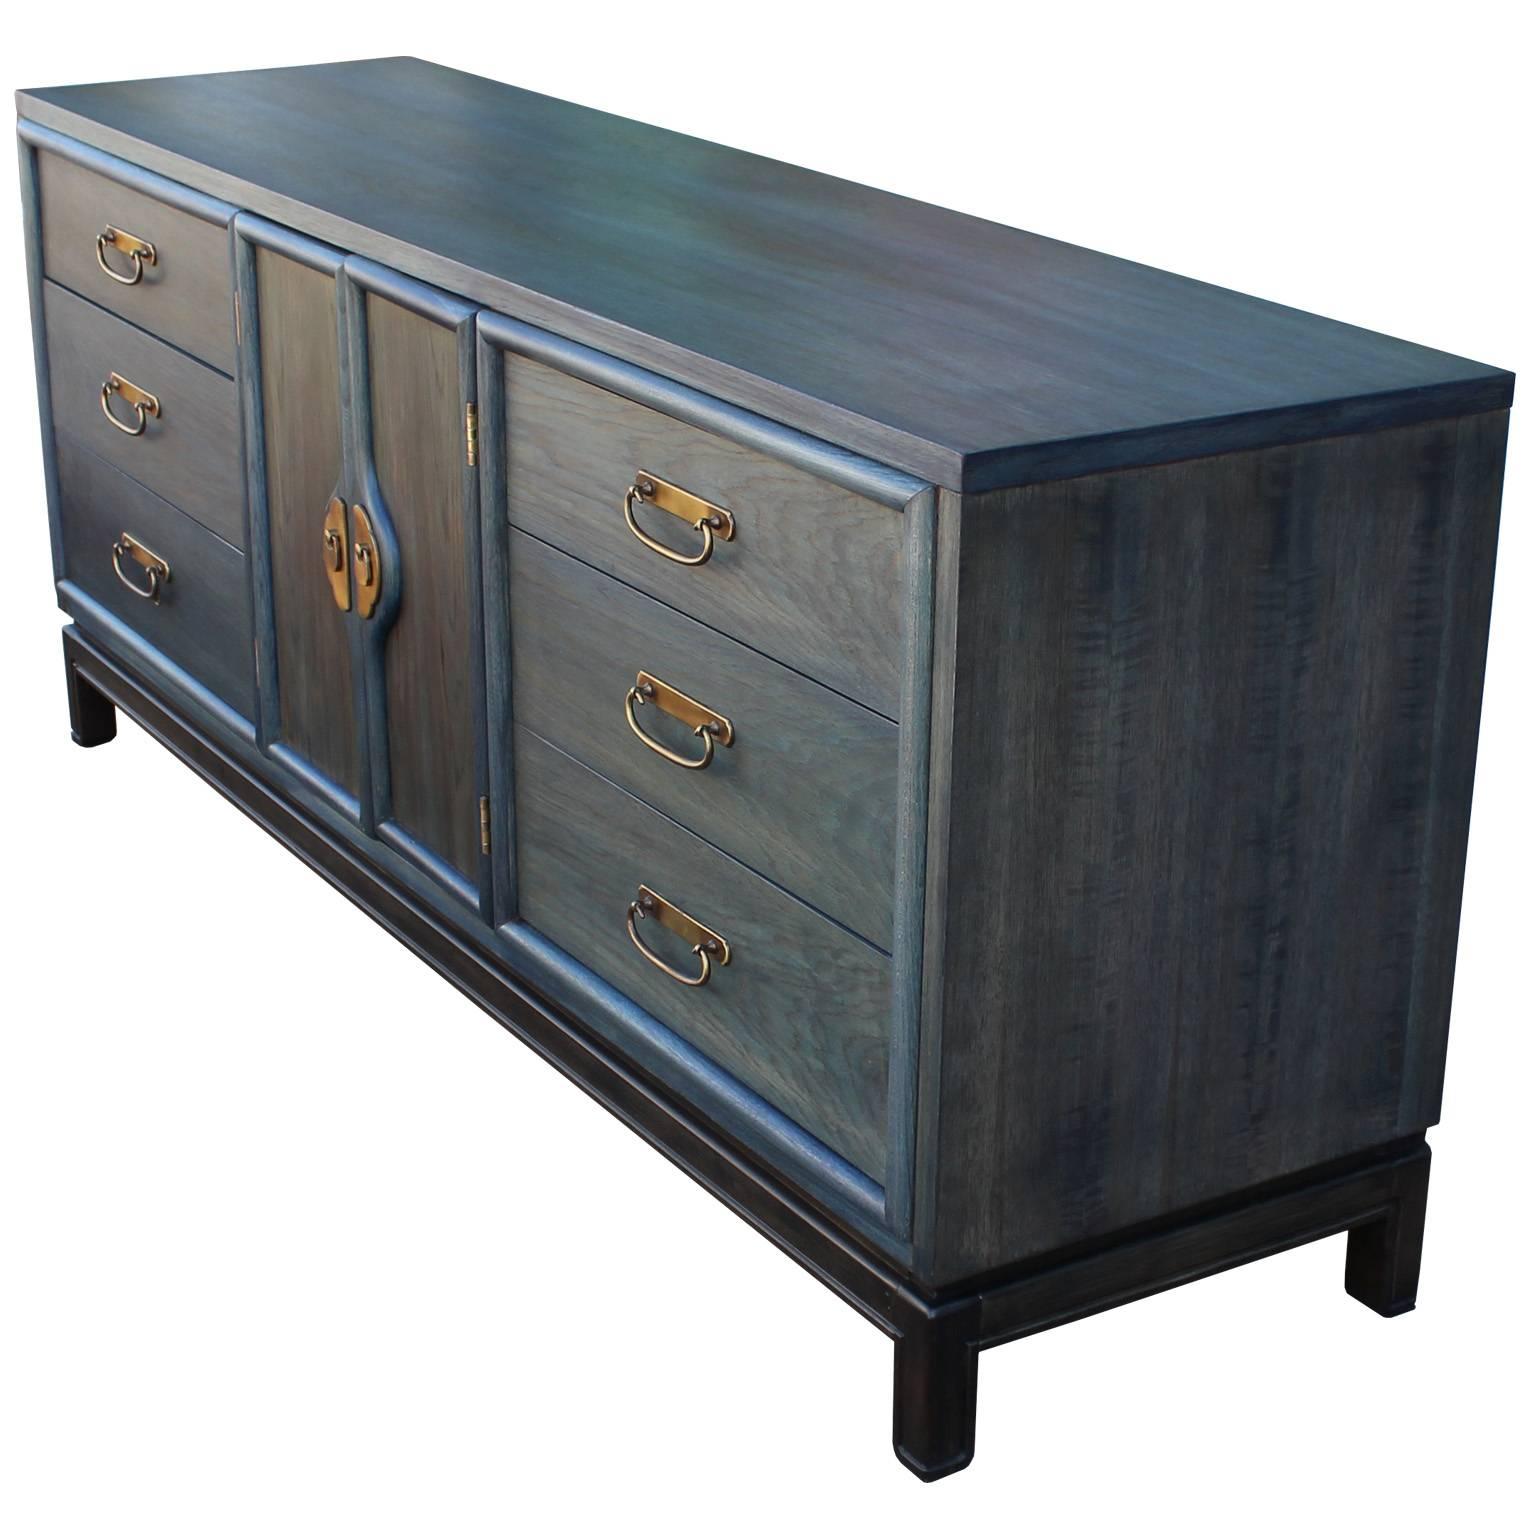 Wonderful dresser freshly refinished with a denim blue Aniline dye. Brass hardware. A black stained base completes the piece. Nine drawers provide excellent storage. Sideboard will add the perfect pop of color to any space.